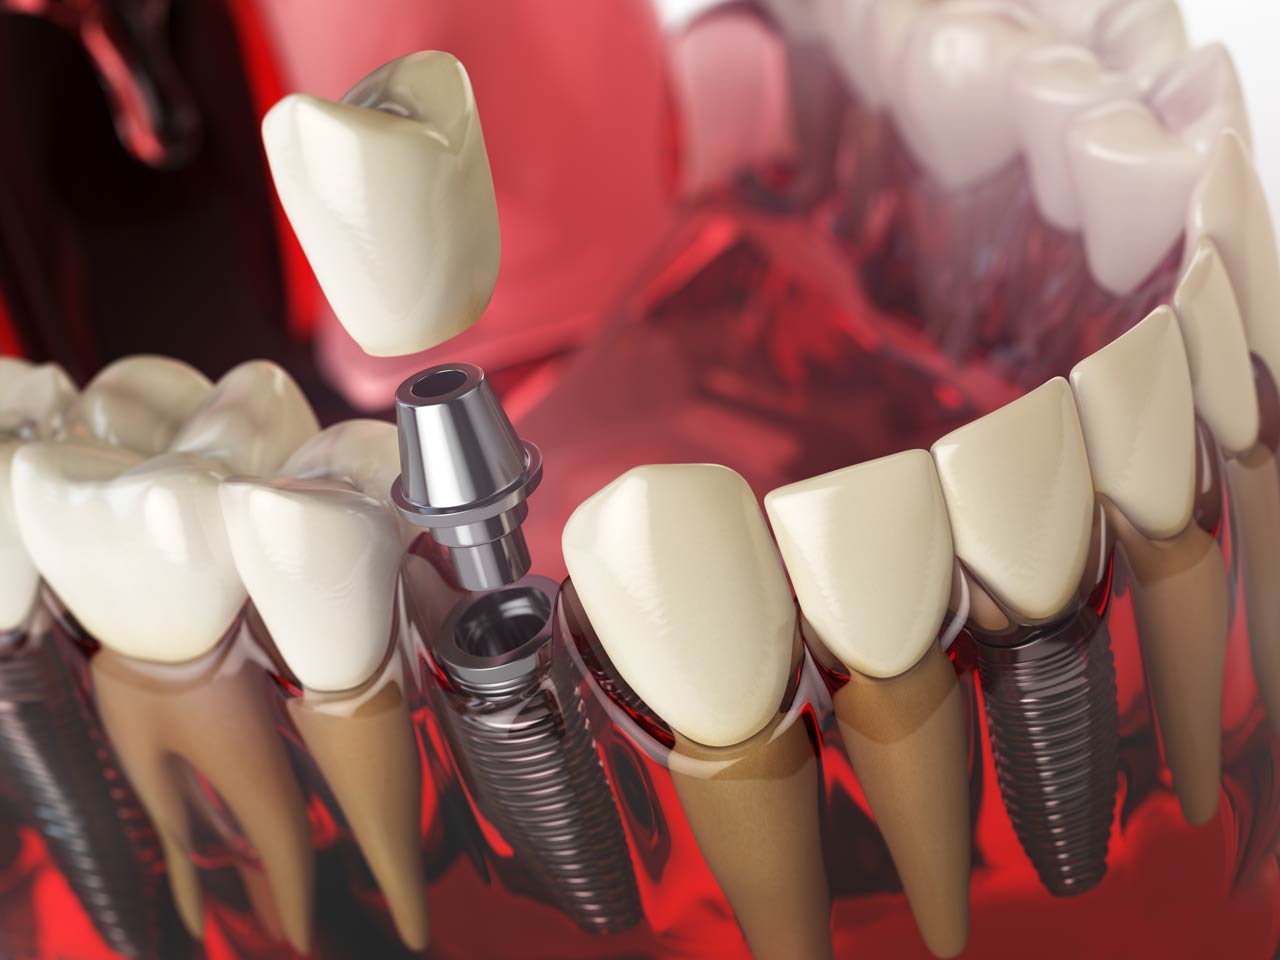 What are the benefits of permanently replacing teeth?